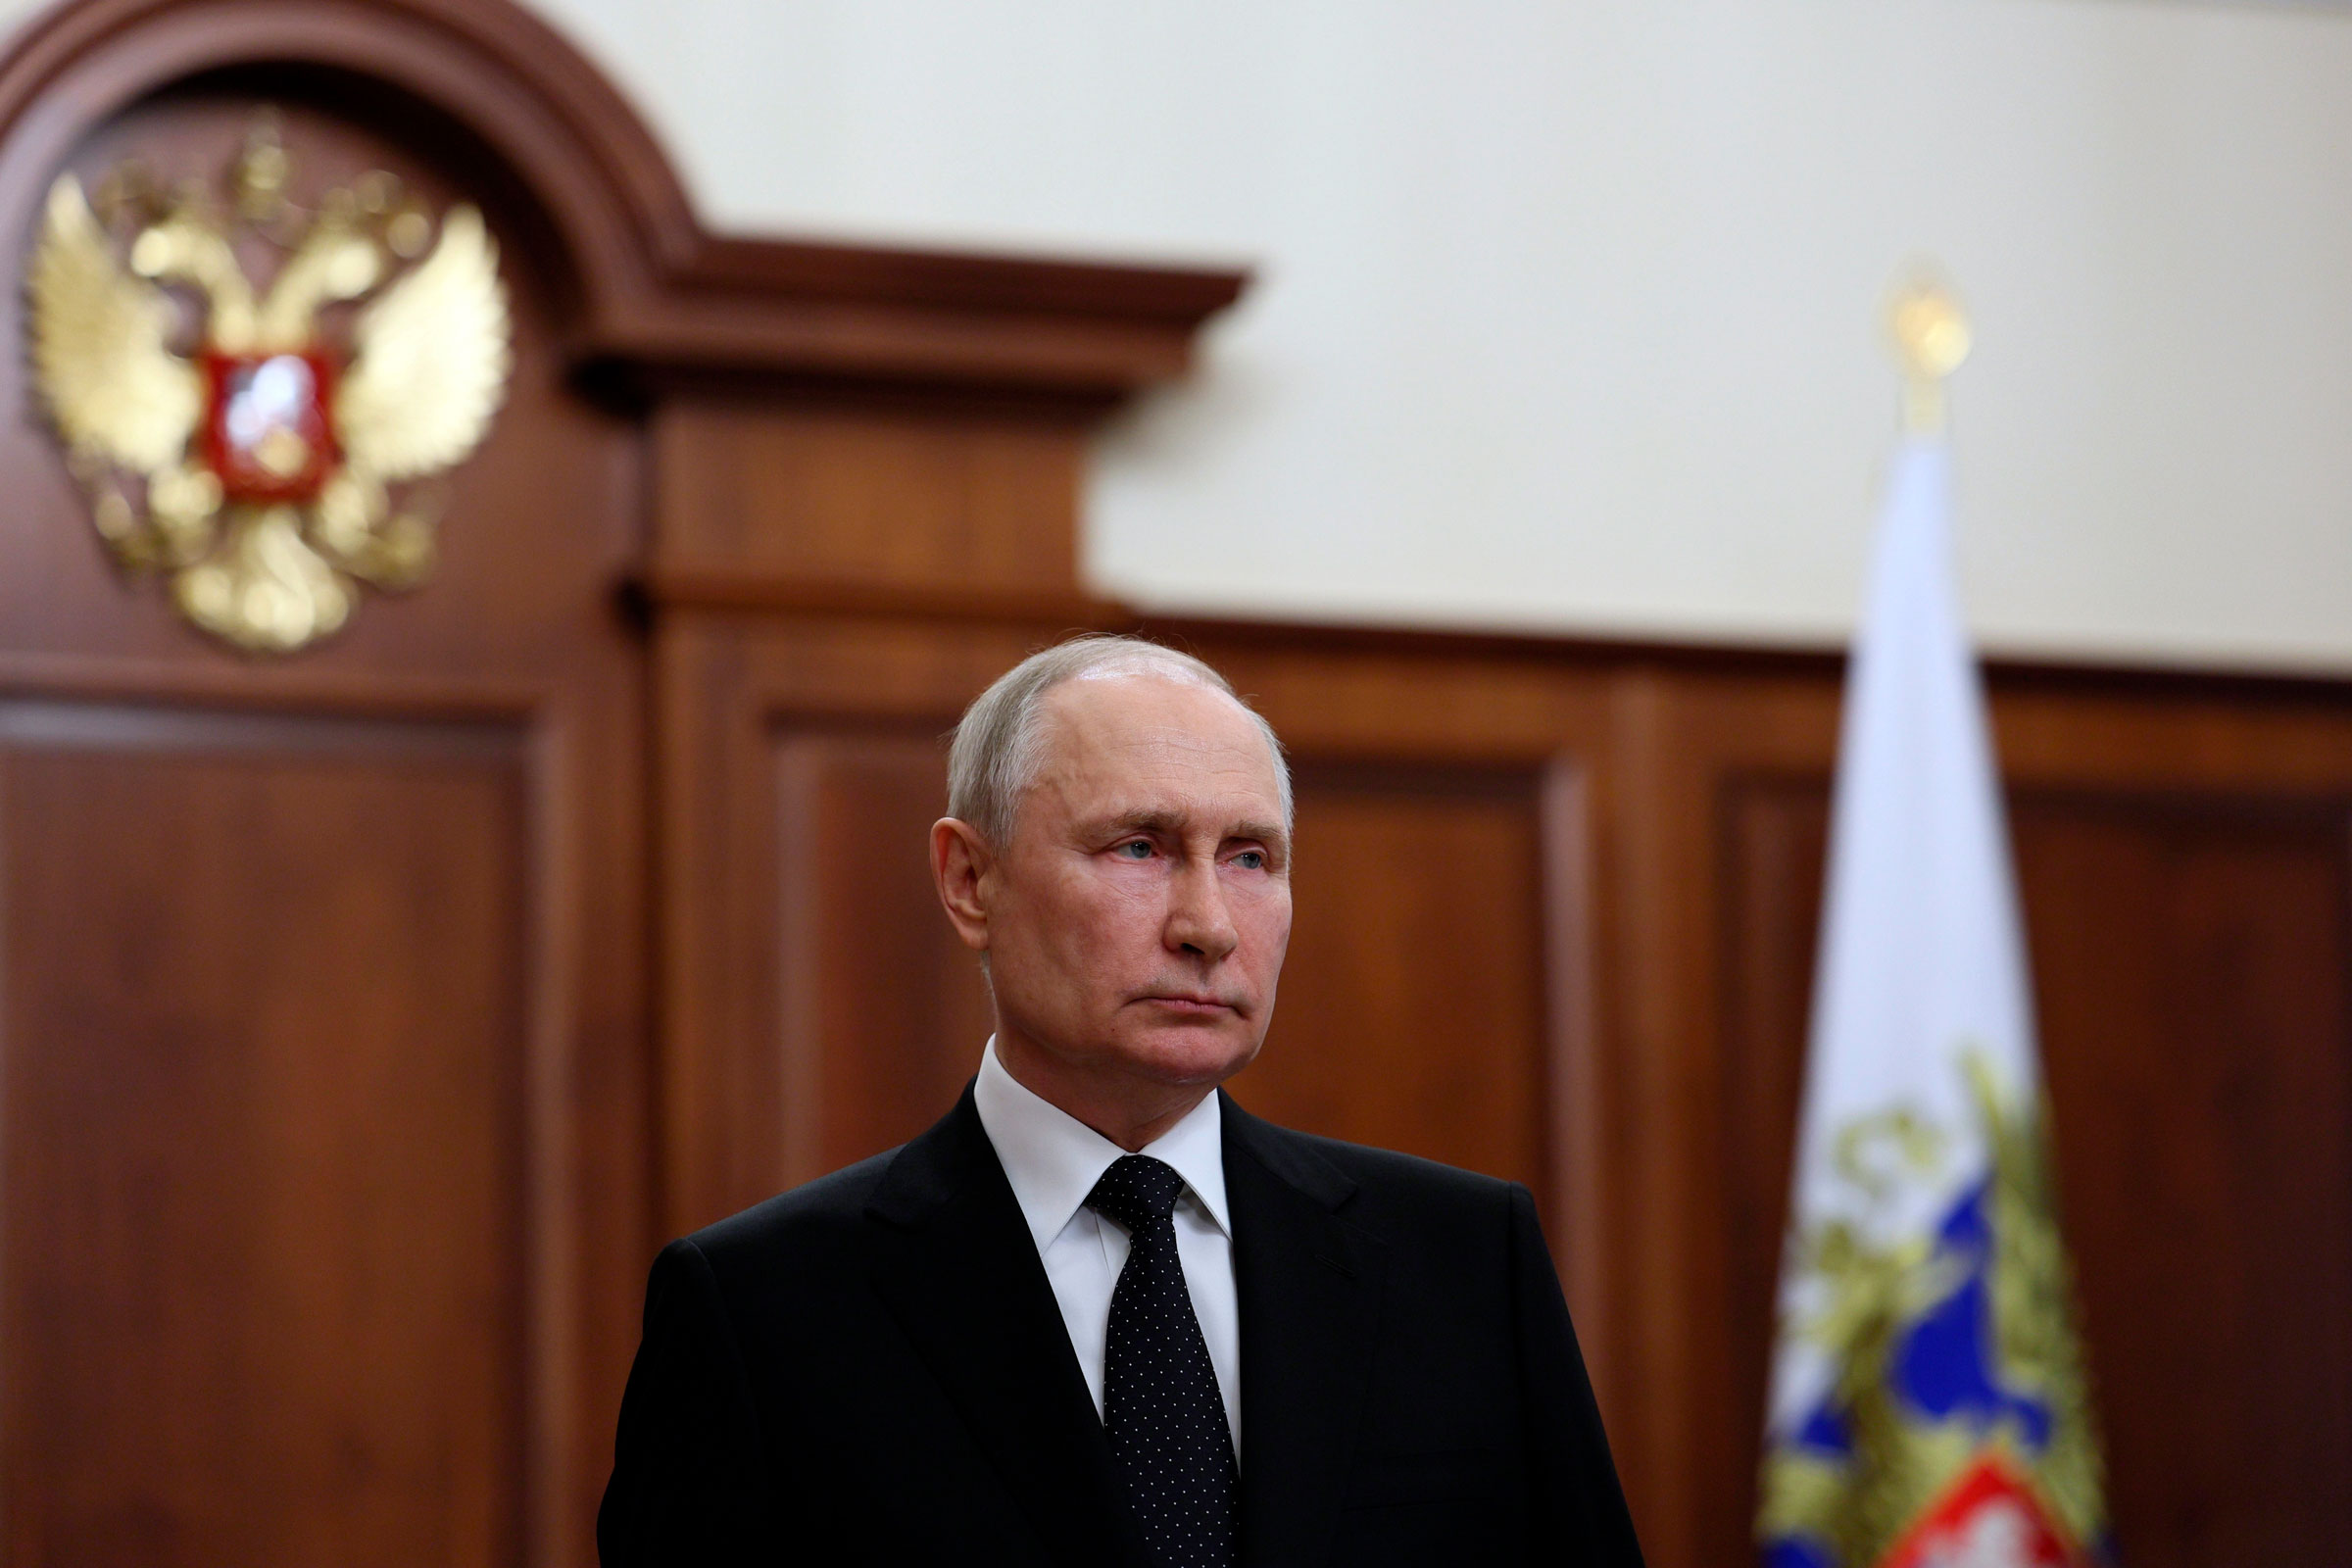 Russian President Vladimir Putin addresses the nation after an armed rebellion